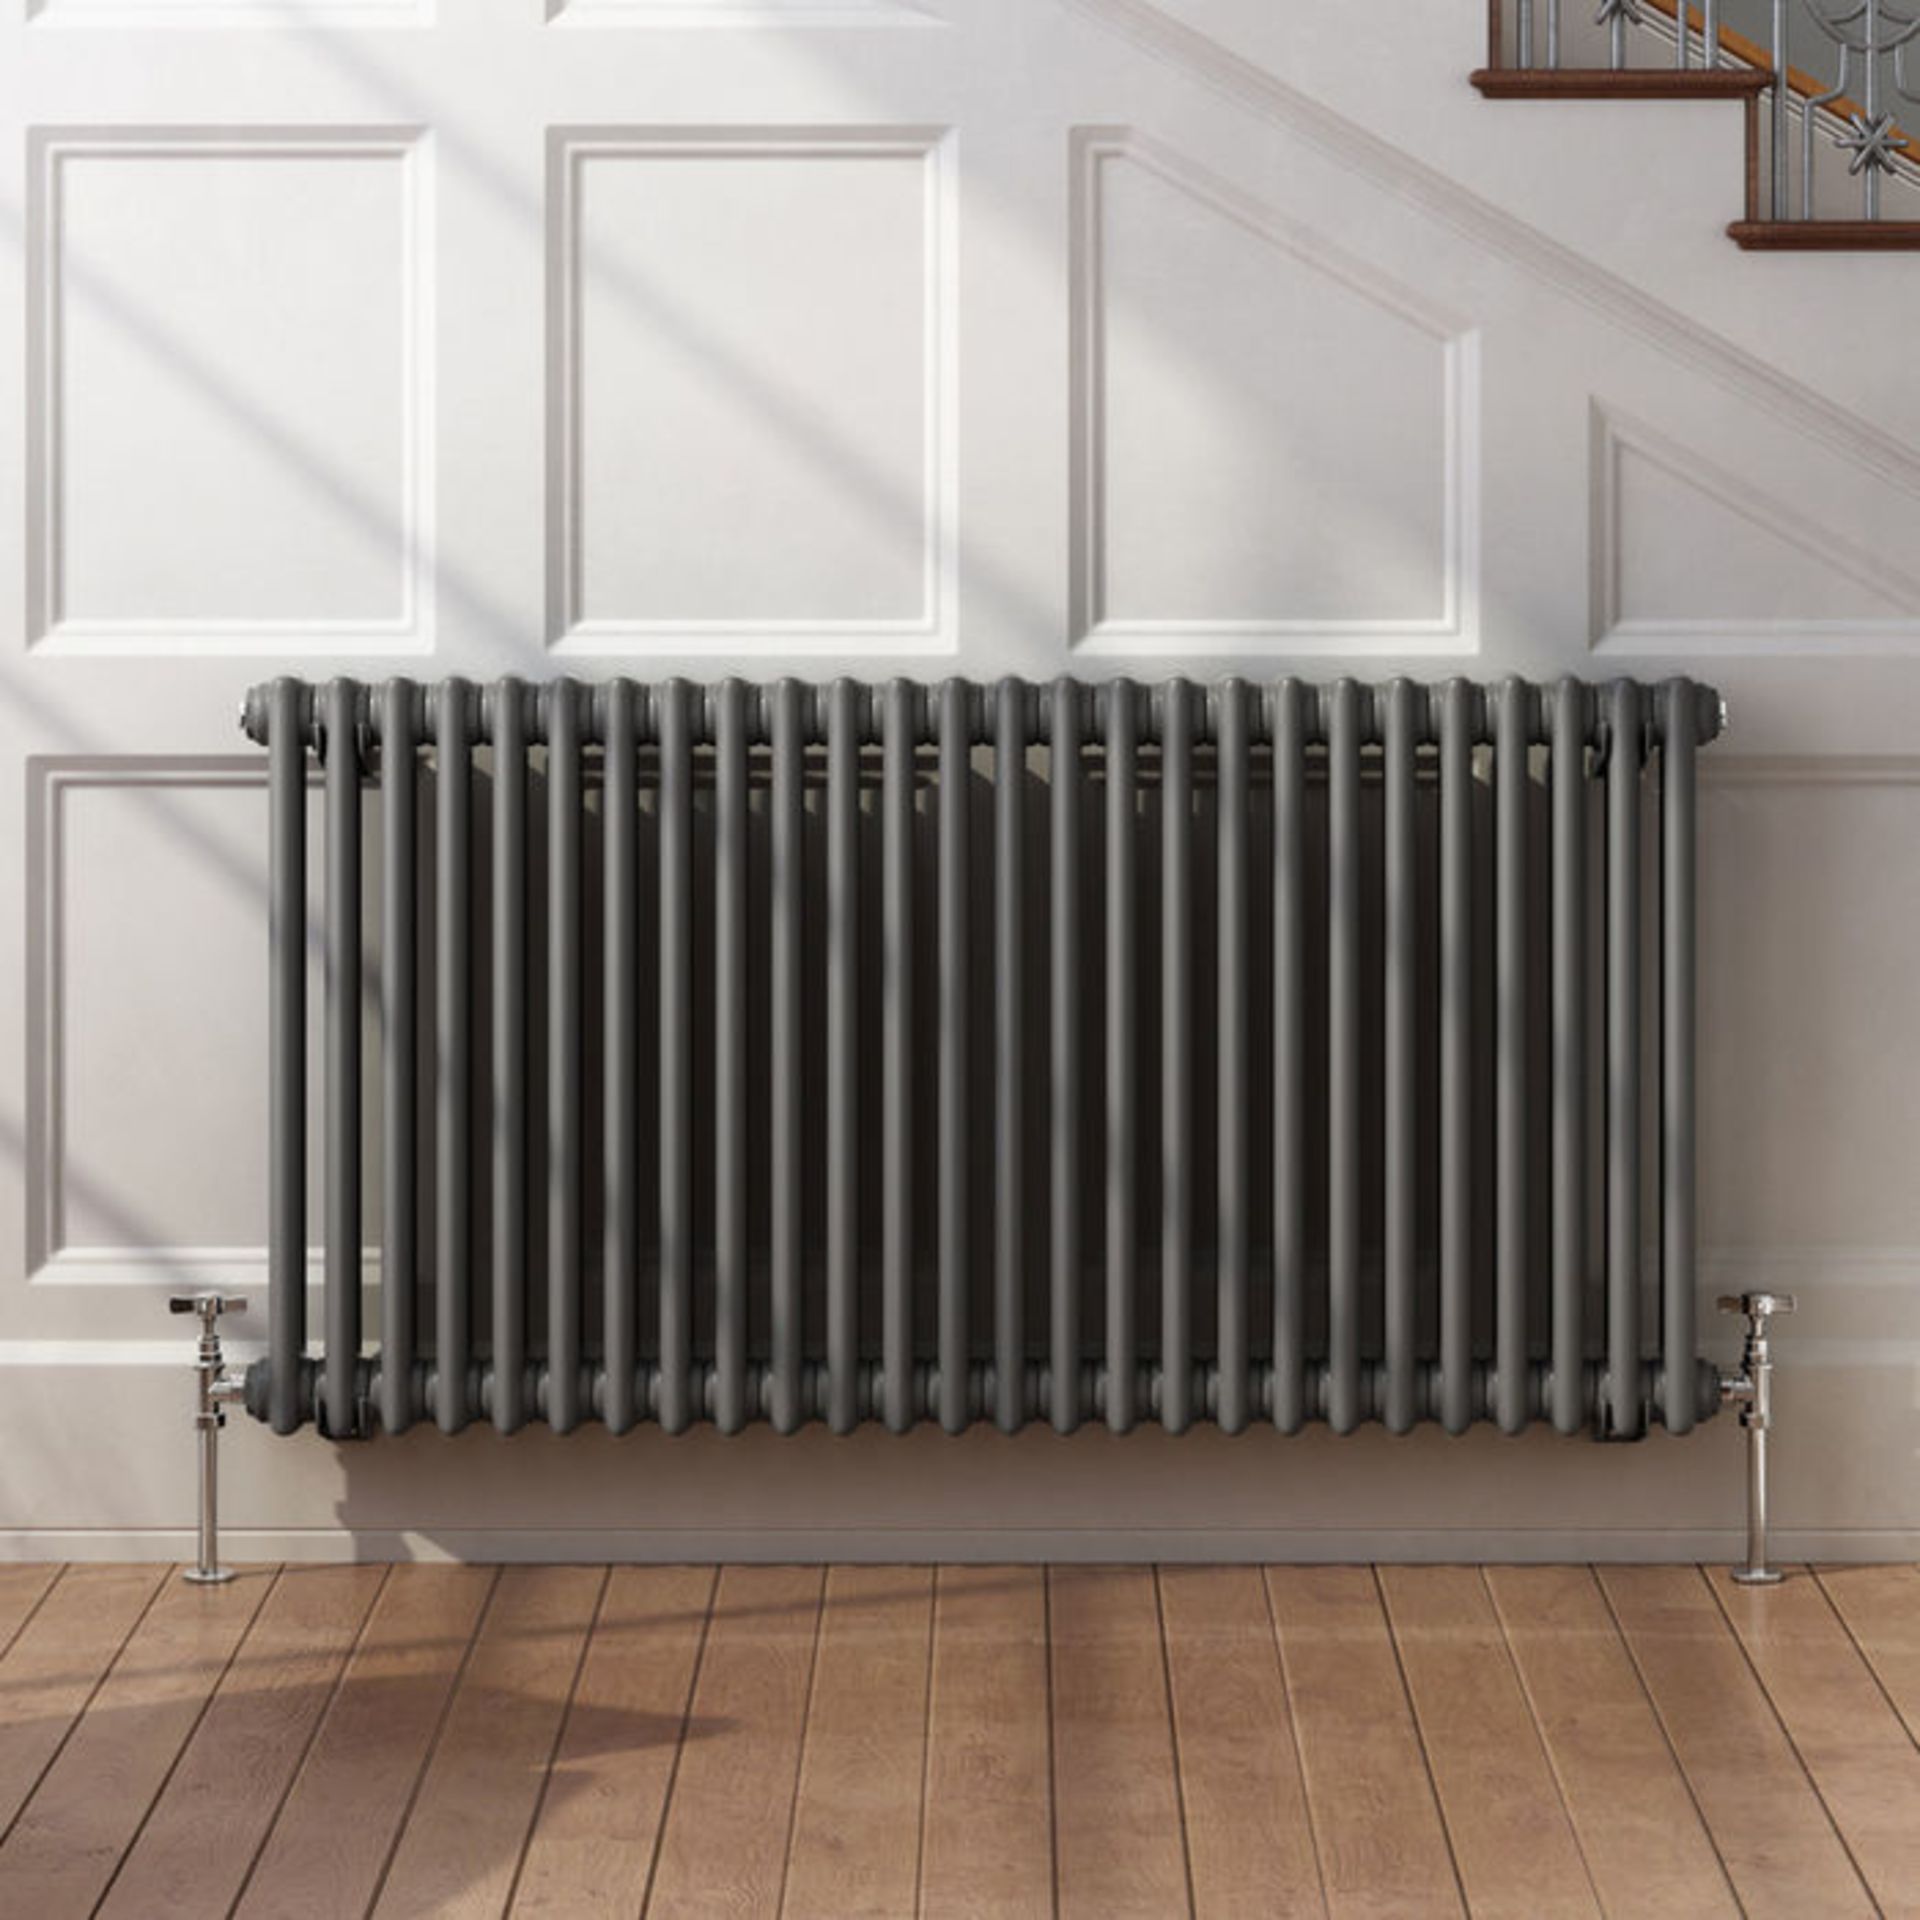 (P3) 600x1188mm Anthracite Double Panel Horizontal Colosseum Traditional Radiator. RRP £474.99. - Image 2 of 4